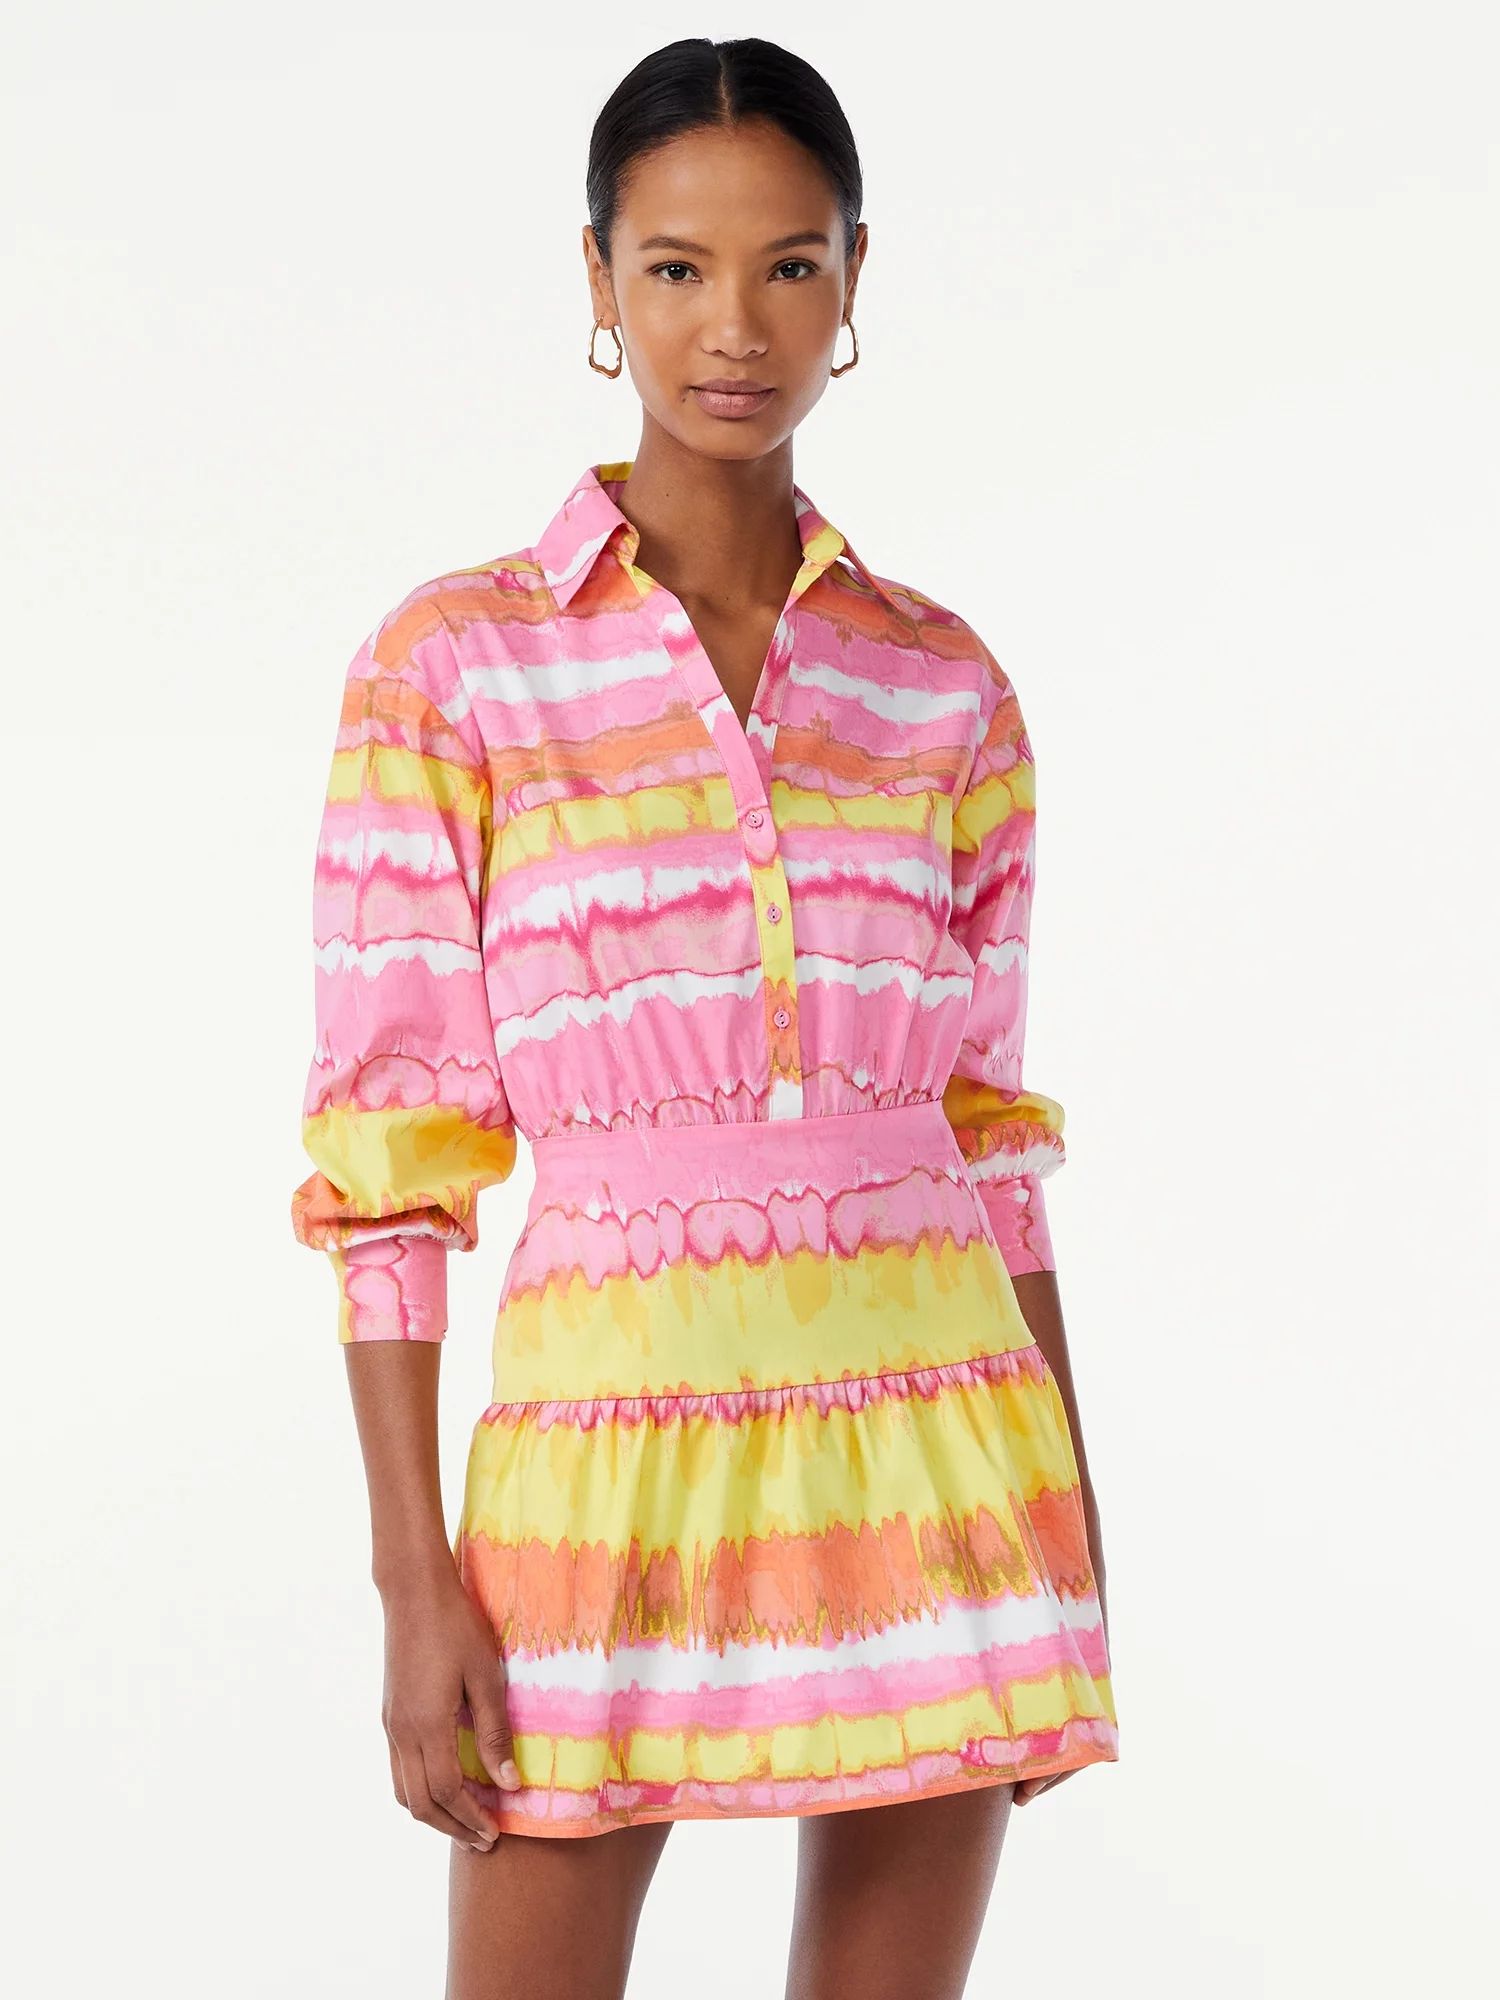 Scoop Women's Collared Shirt Dress with Long Sleeves | Walmart (US)